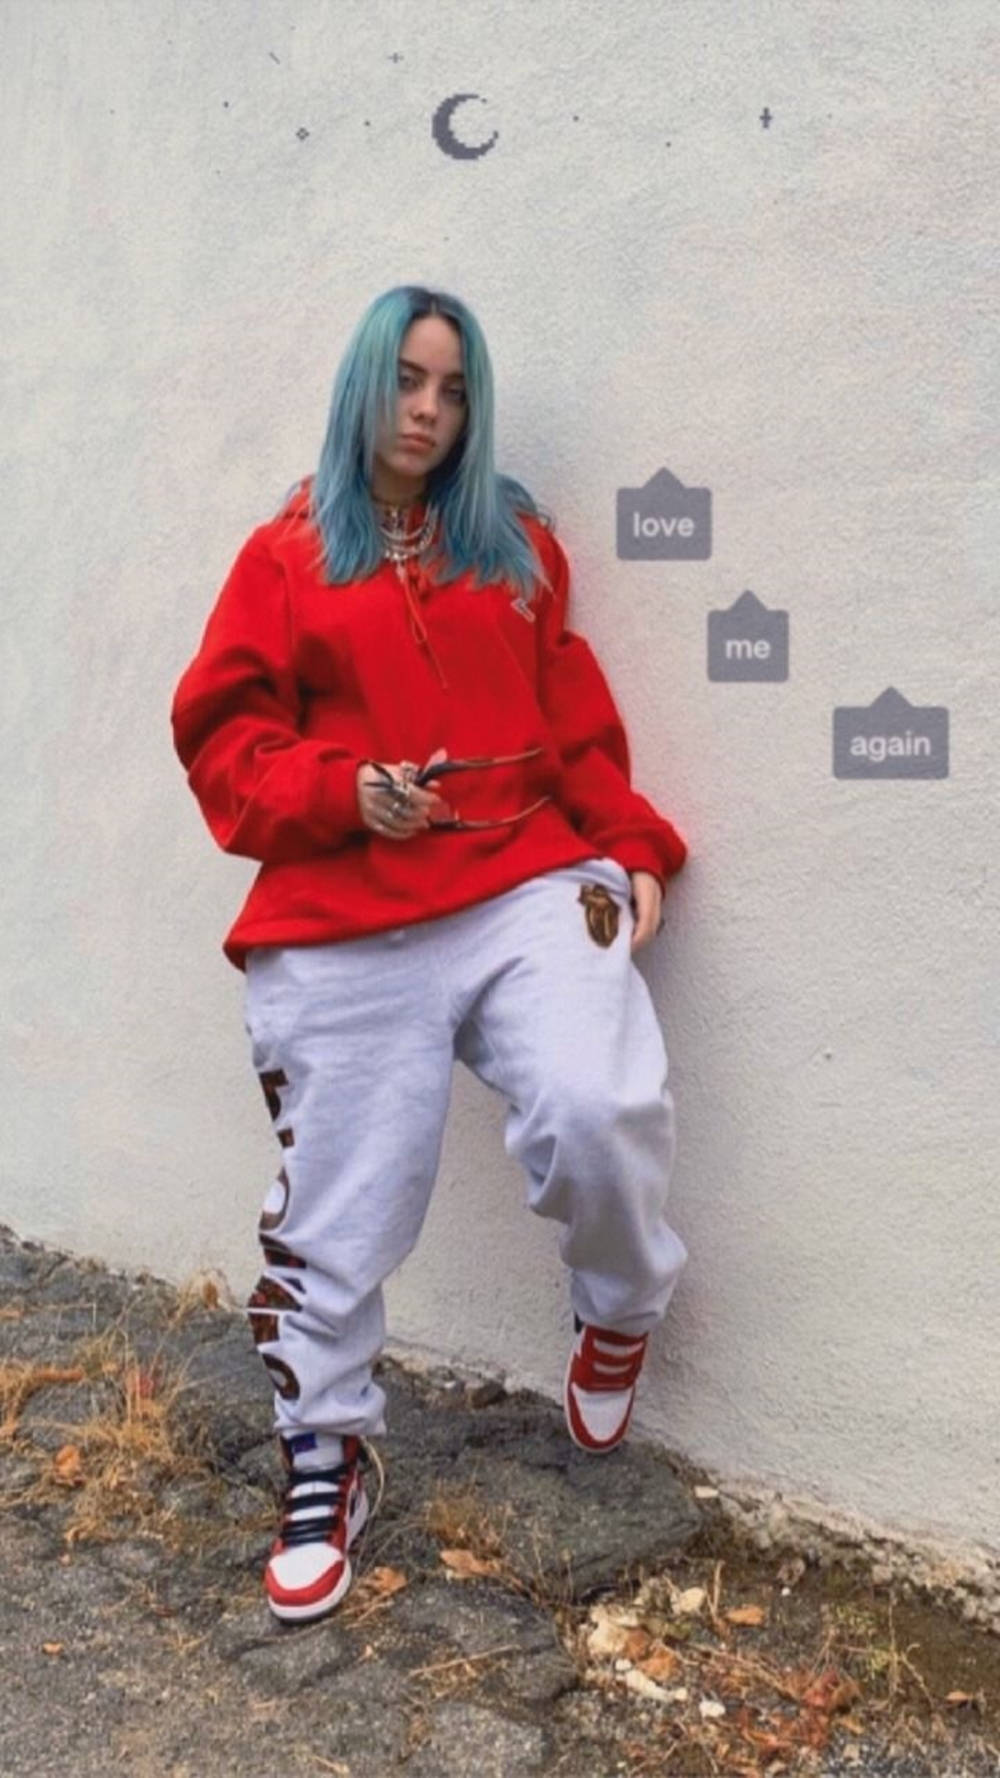 Aesthetic Billie Eilish On Wall Text Bubbles Background